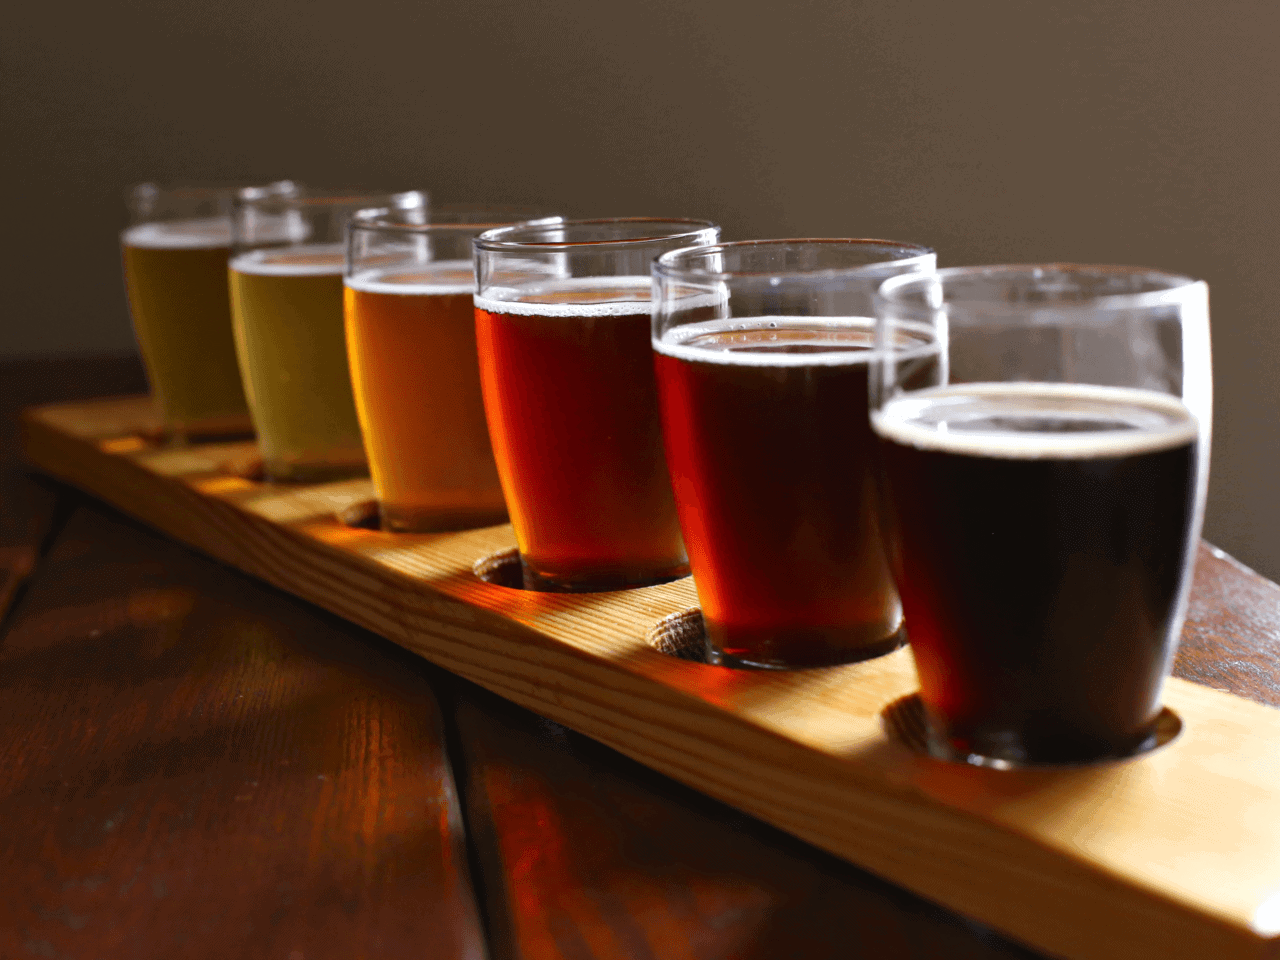 A flight of locally brewed beers at Homegrown Brewery in Downtown Oxford